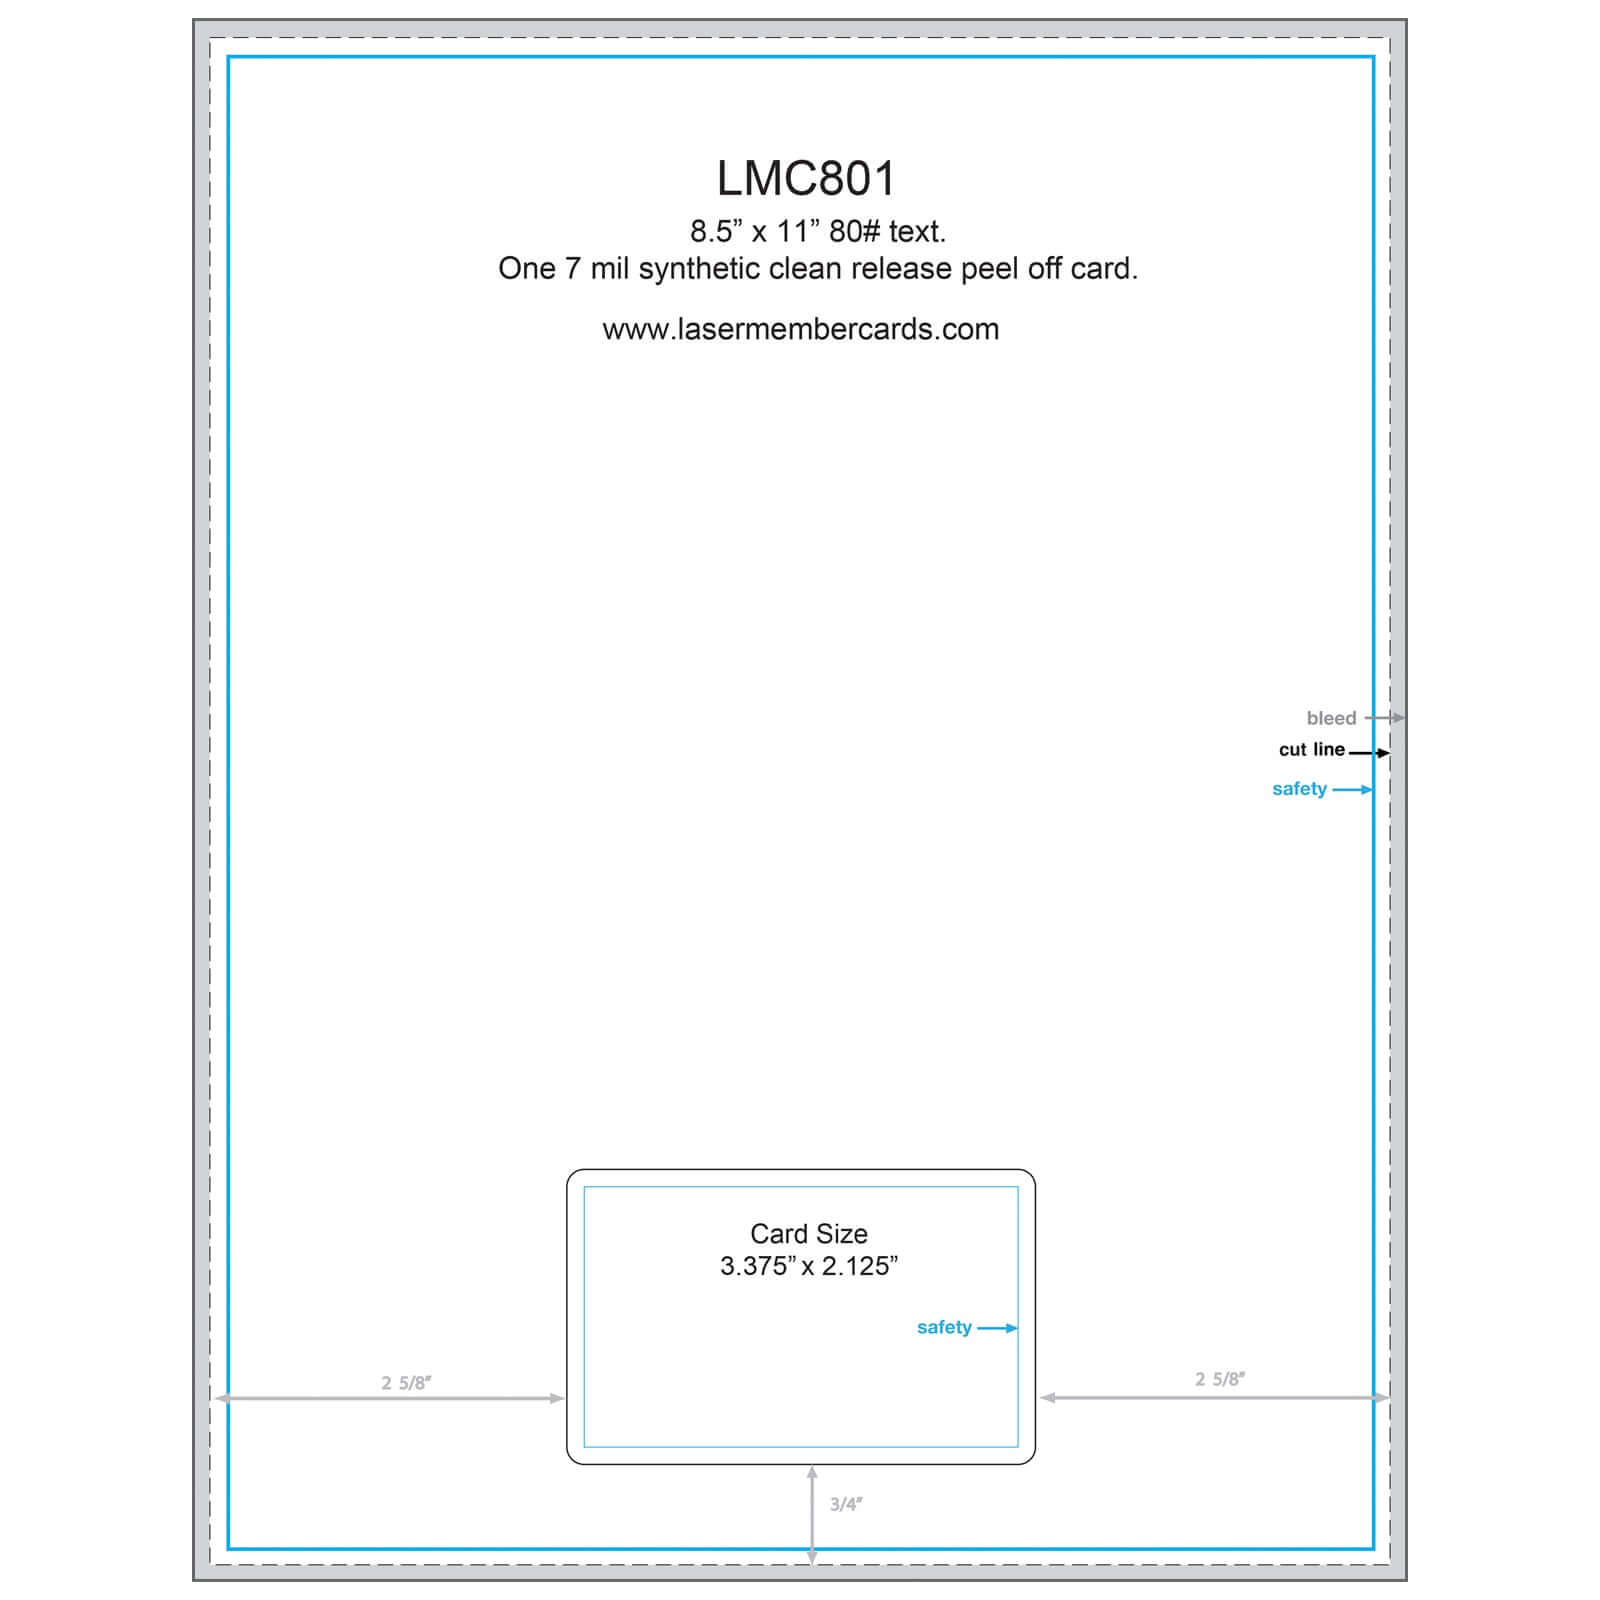 LMC801 7 mil synthetic affixed Laser Membership Cards for Printers layout